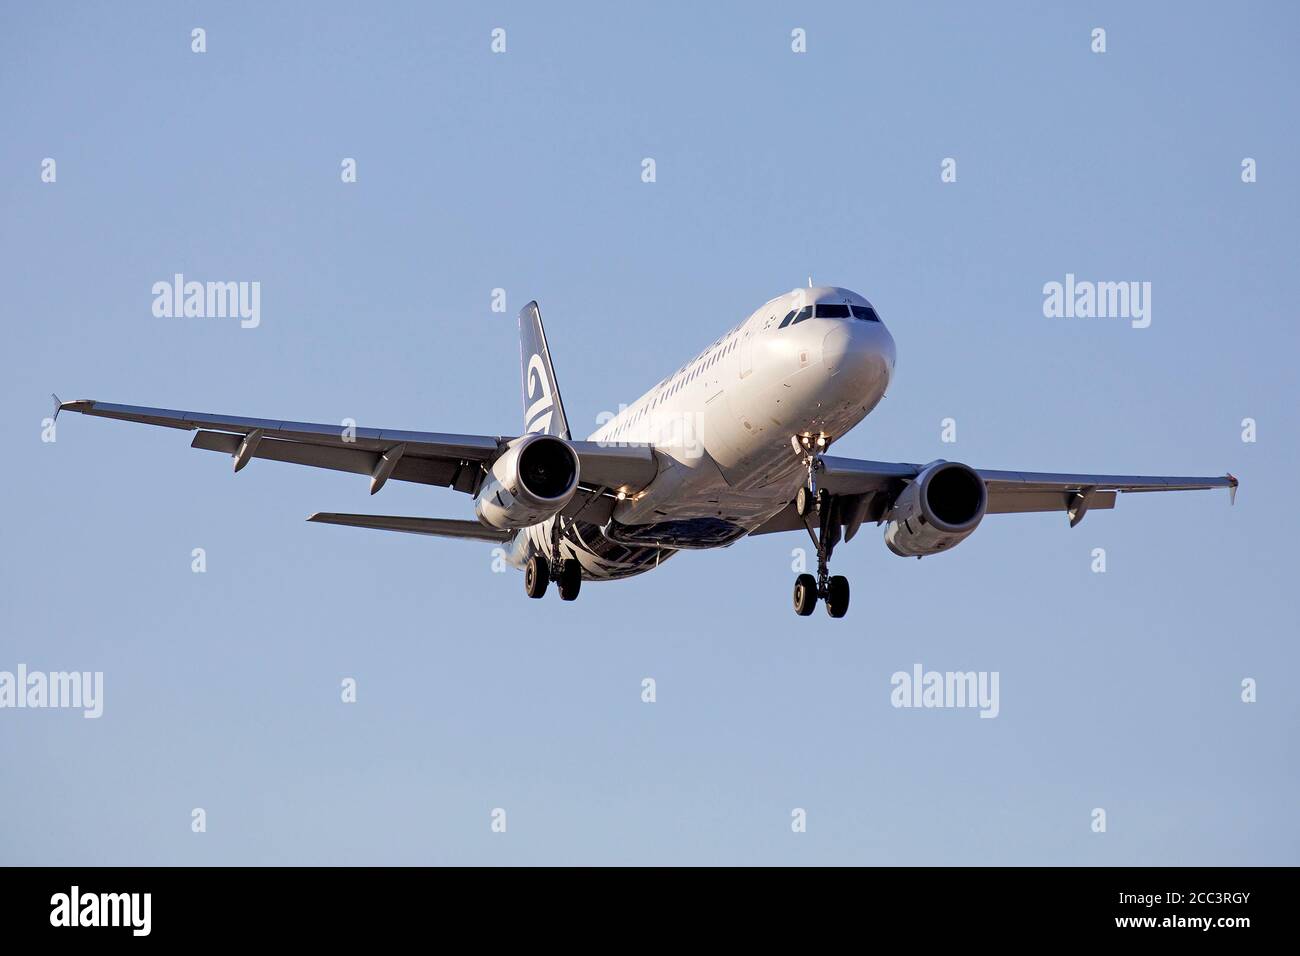 Air New Zealand Airbus A320 approaching Sydney Airport Stock Photo